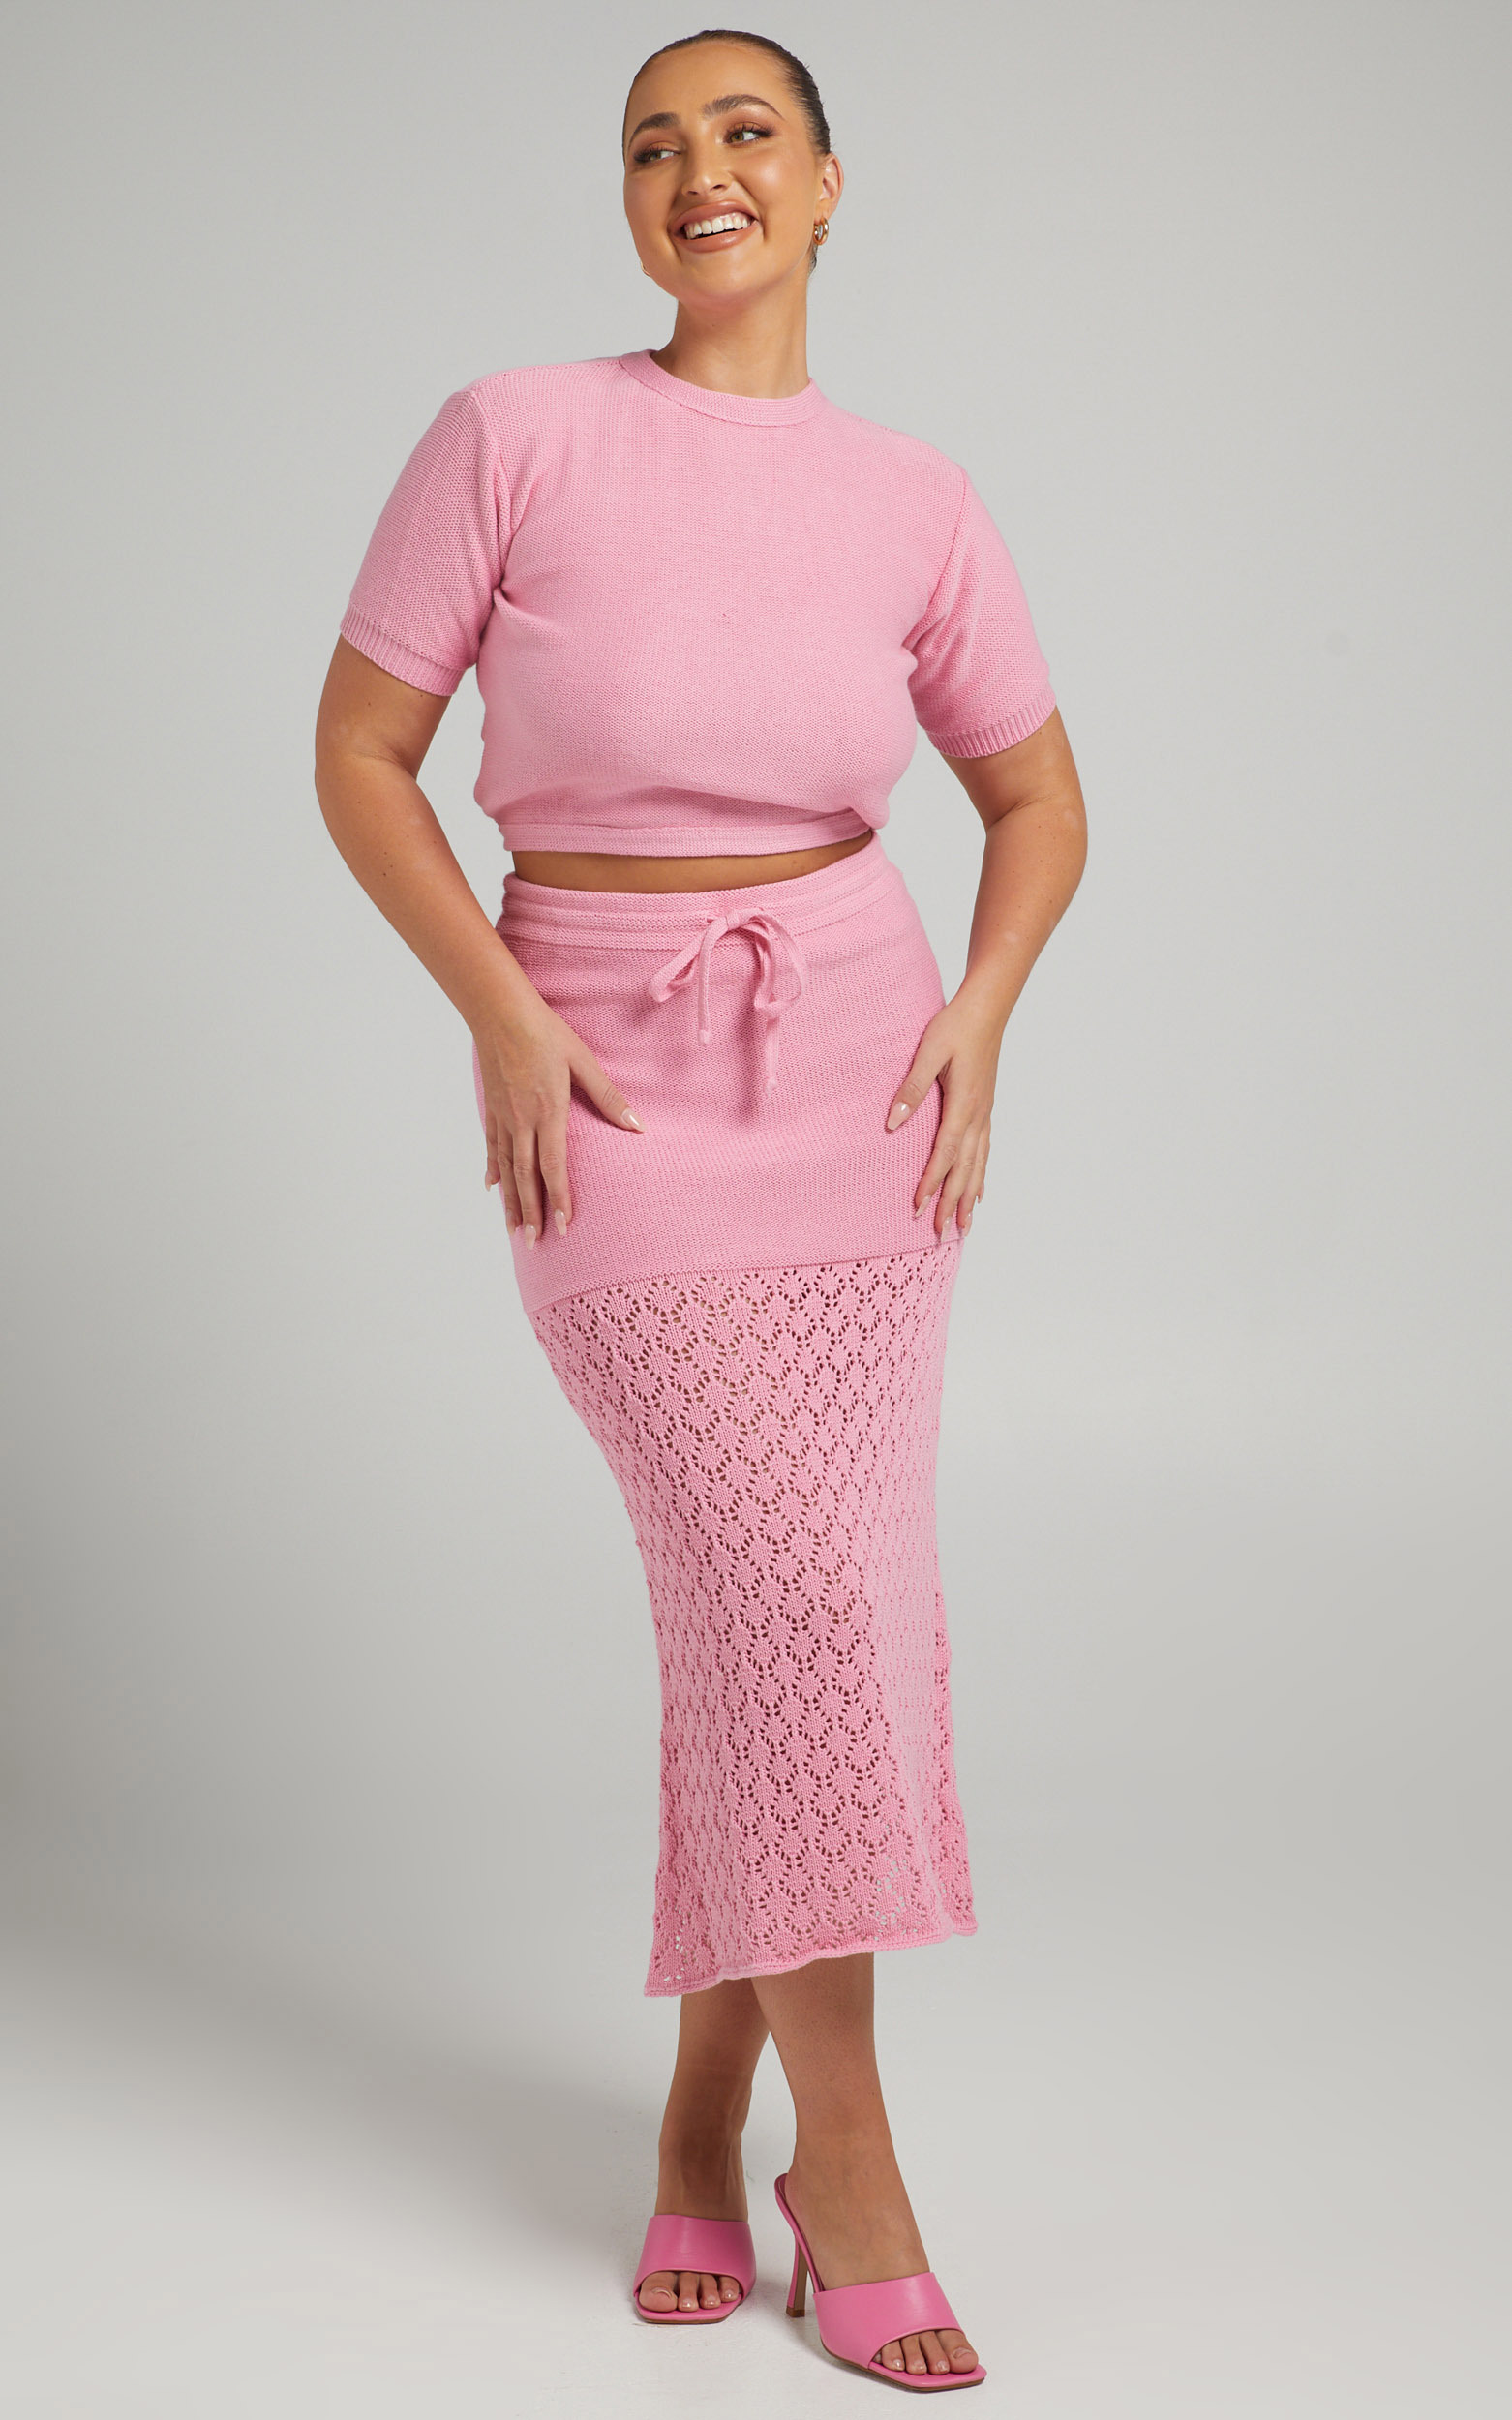 Rue Stiic - Paloma Knit Skirt in Pink - L, PNK1, hi-res image number null